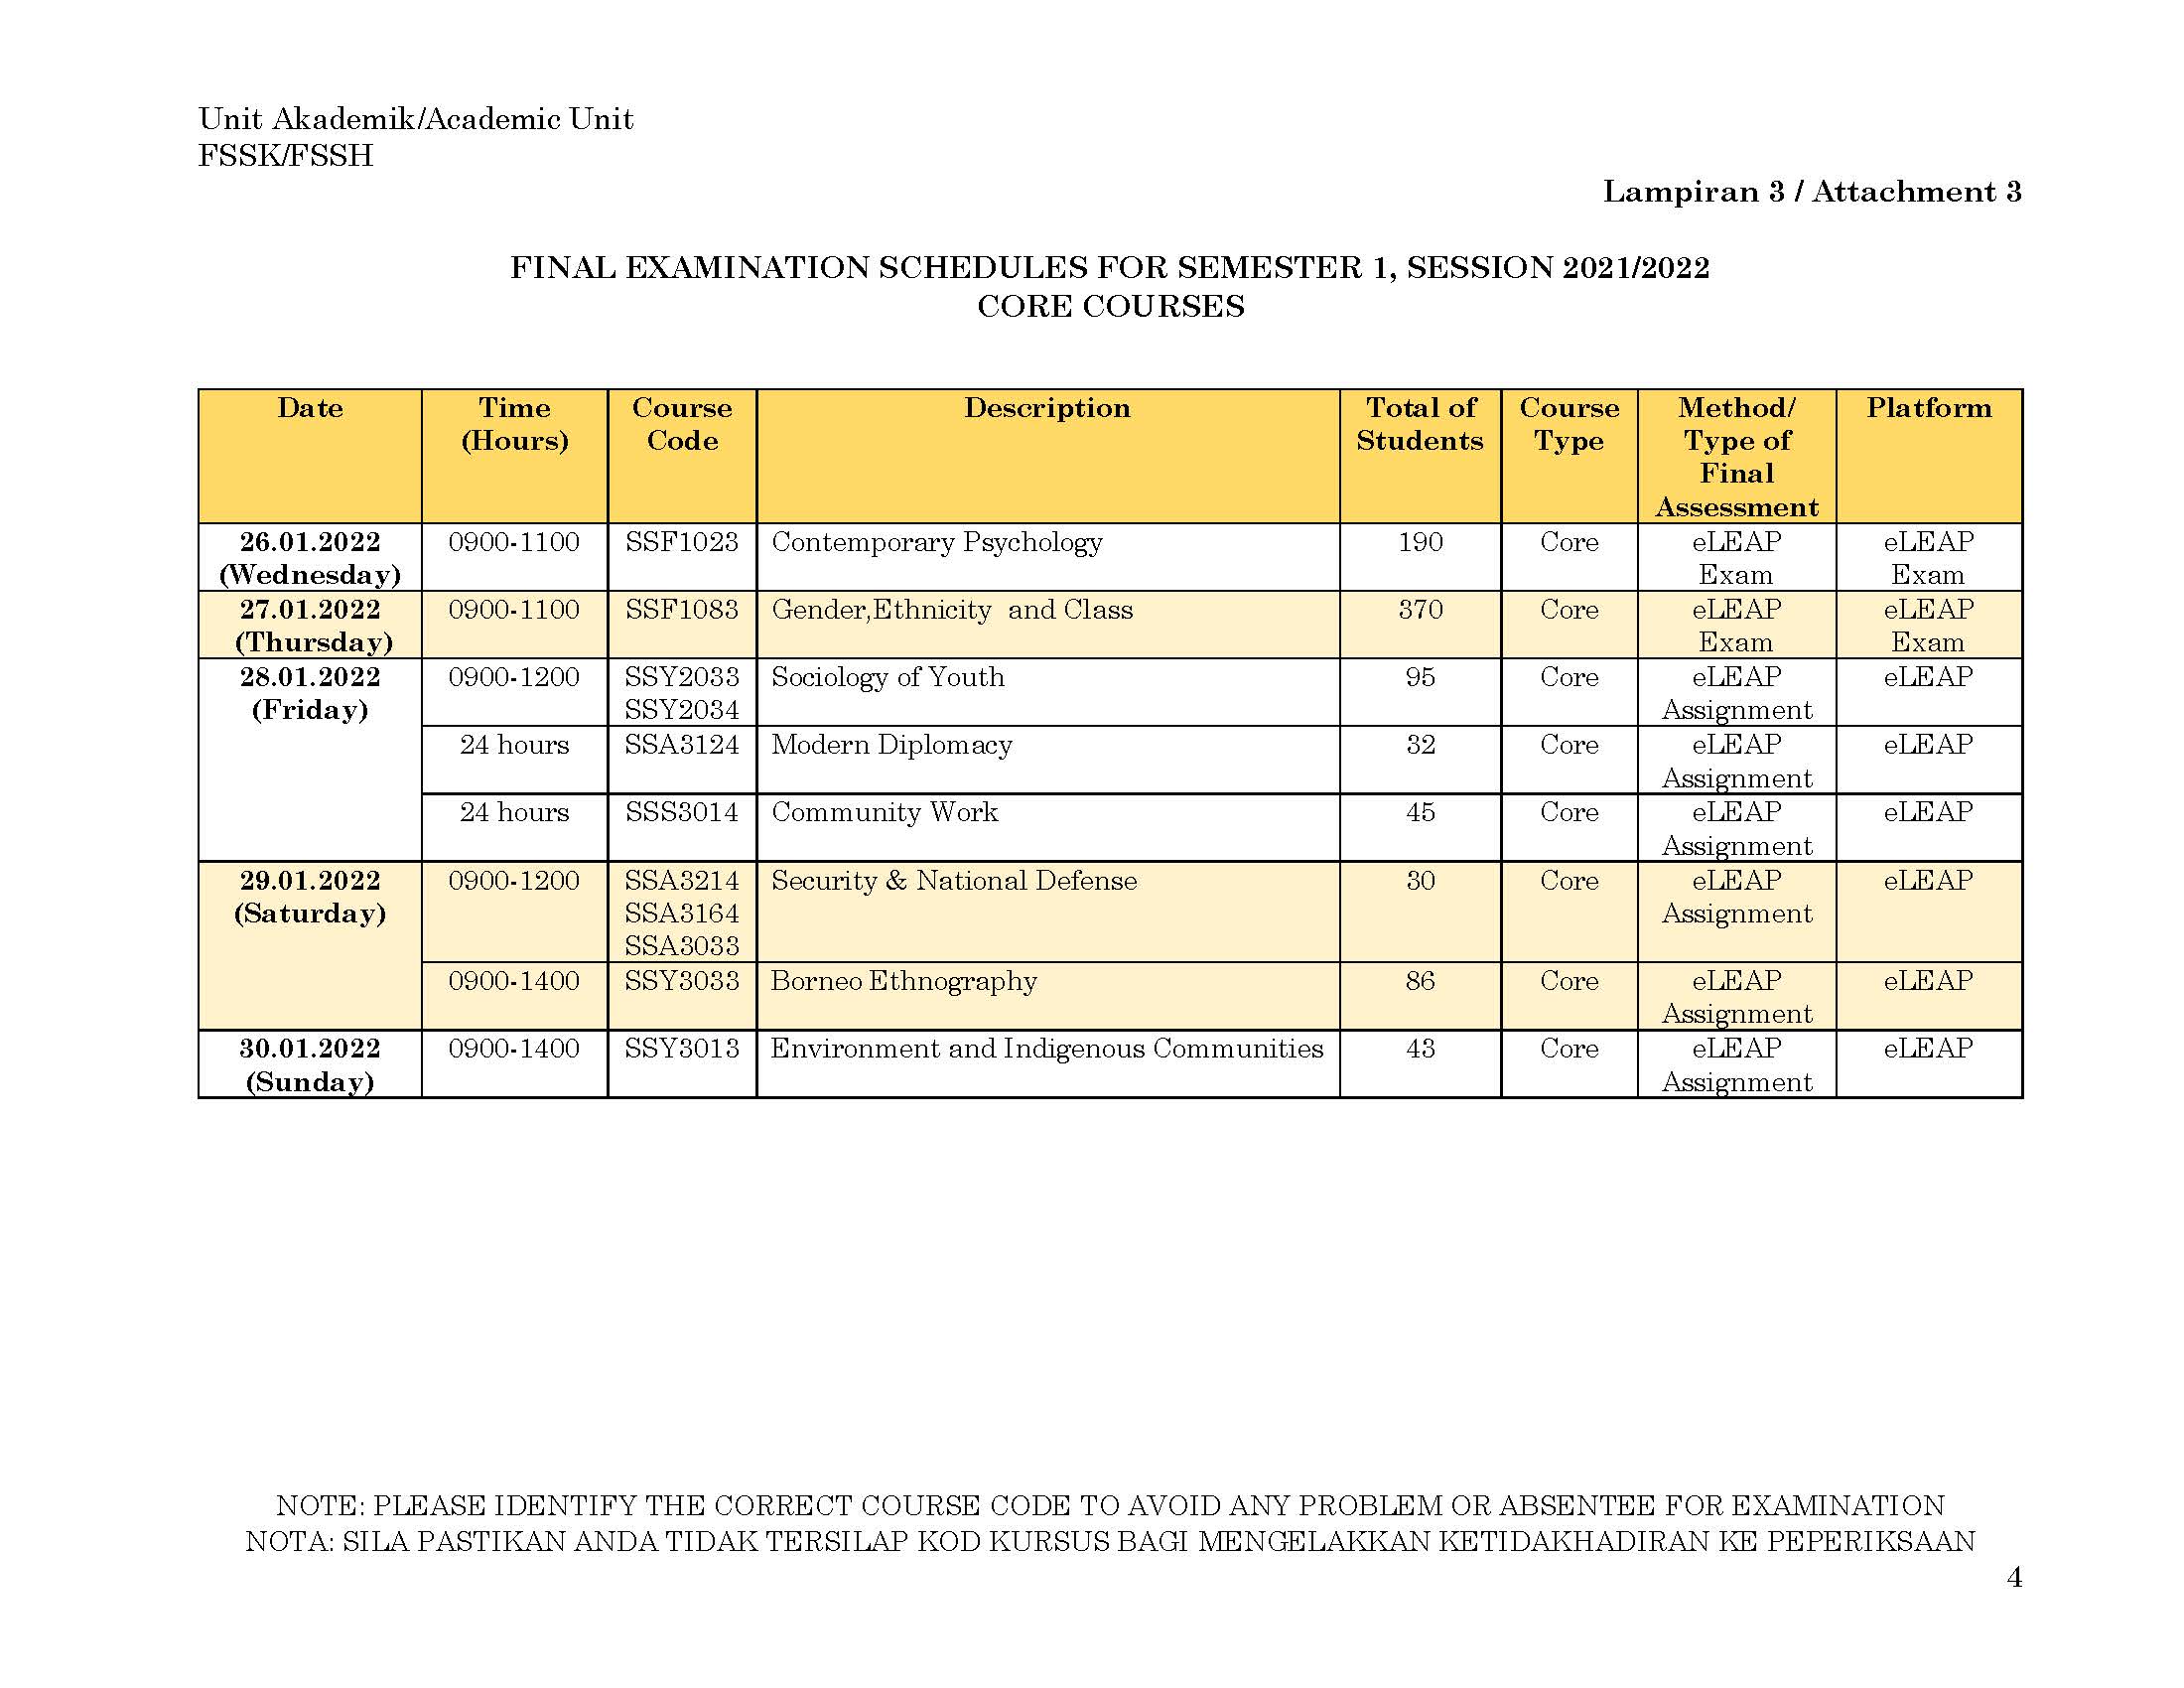 FINAL EXAMINATION SCHEDULES FOR SEMESTER 1 SESSION 2021 2022 2 Page 5